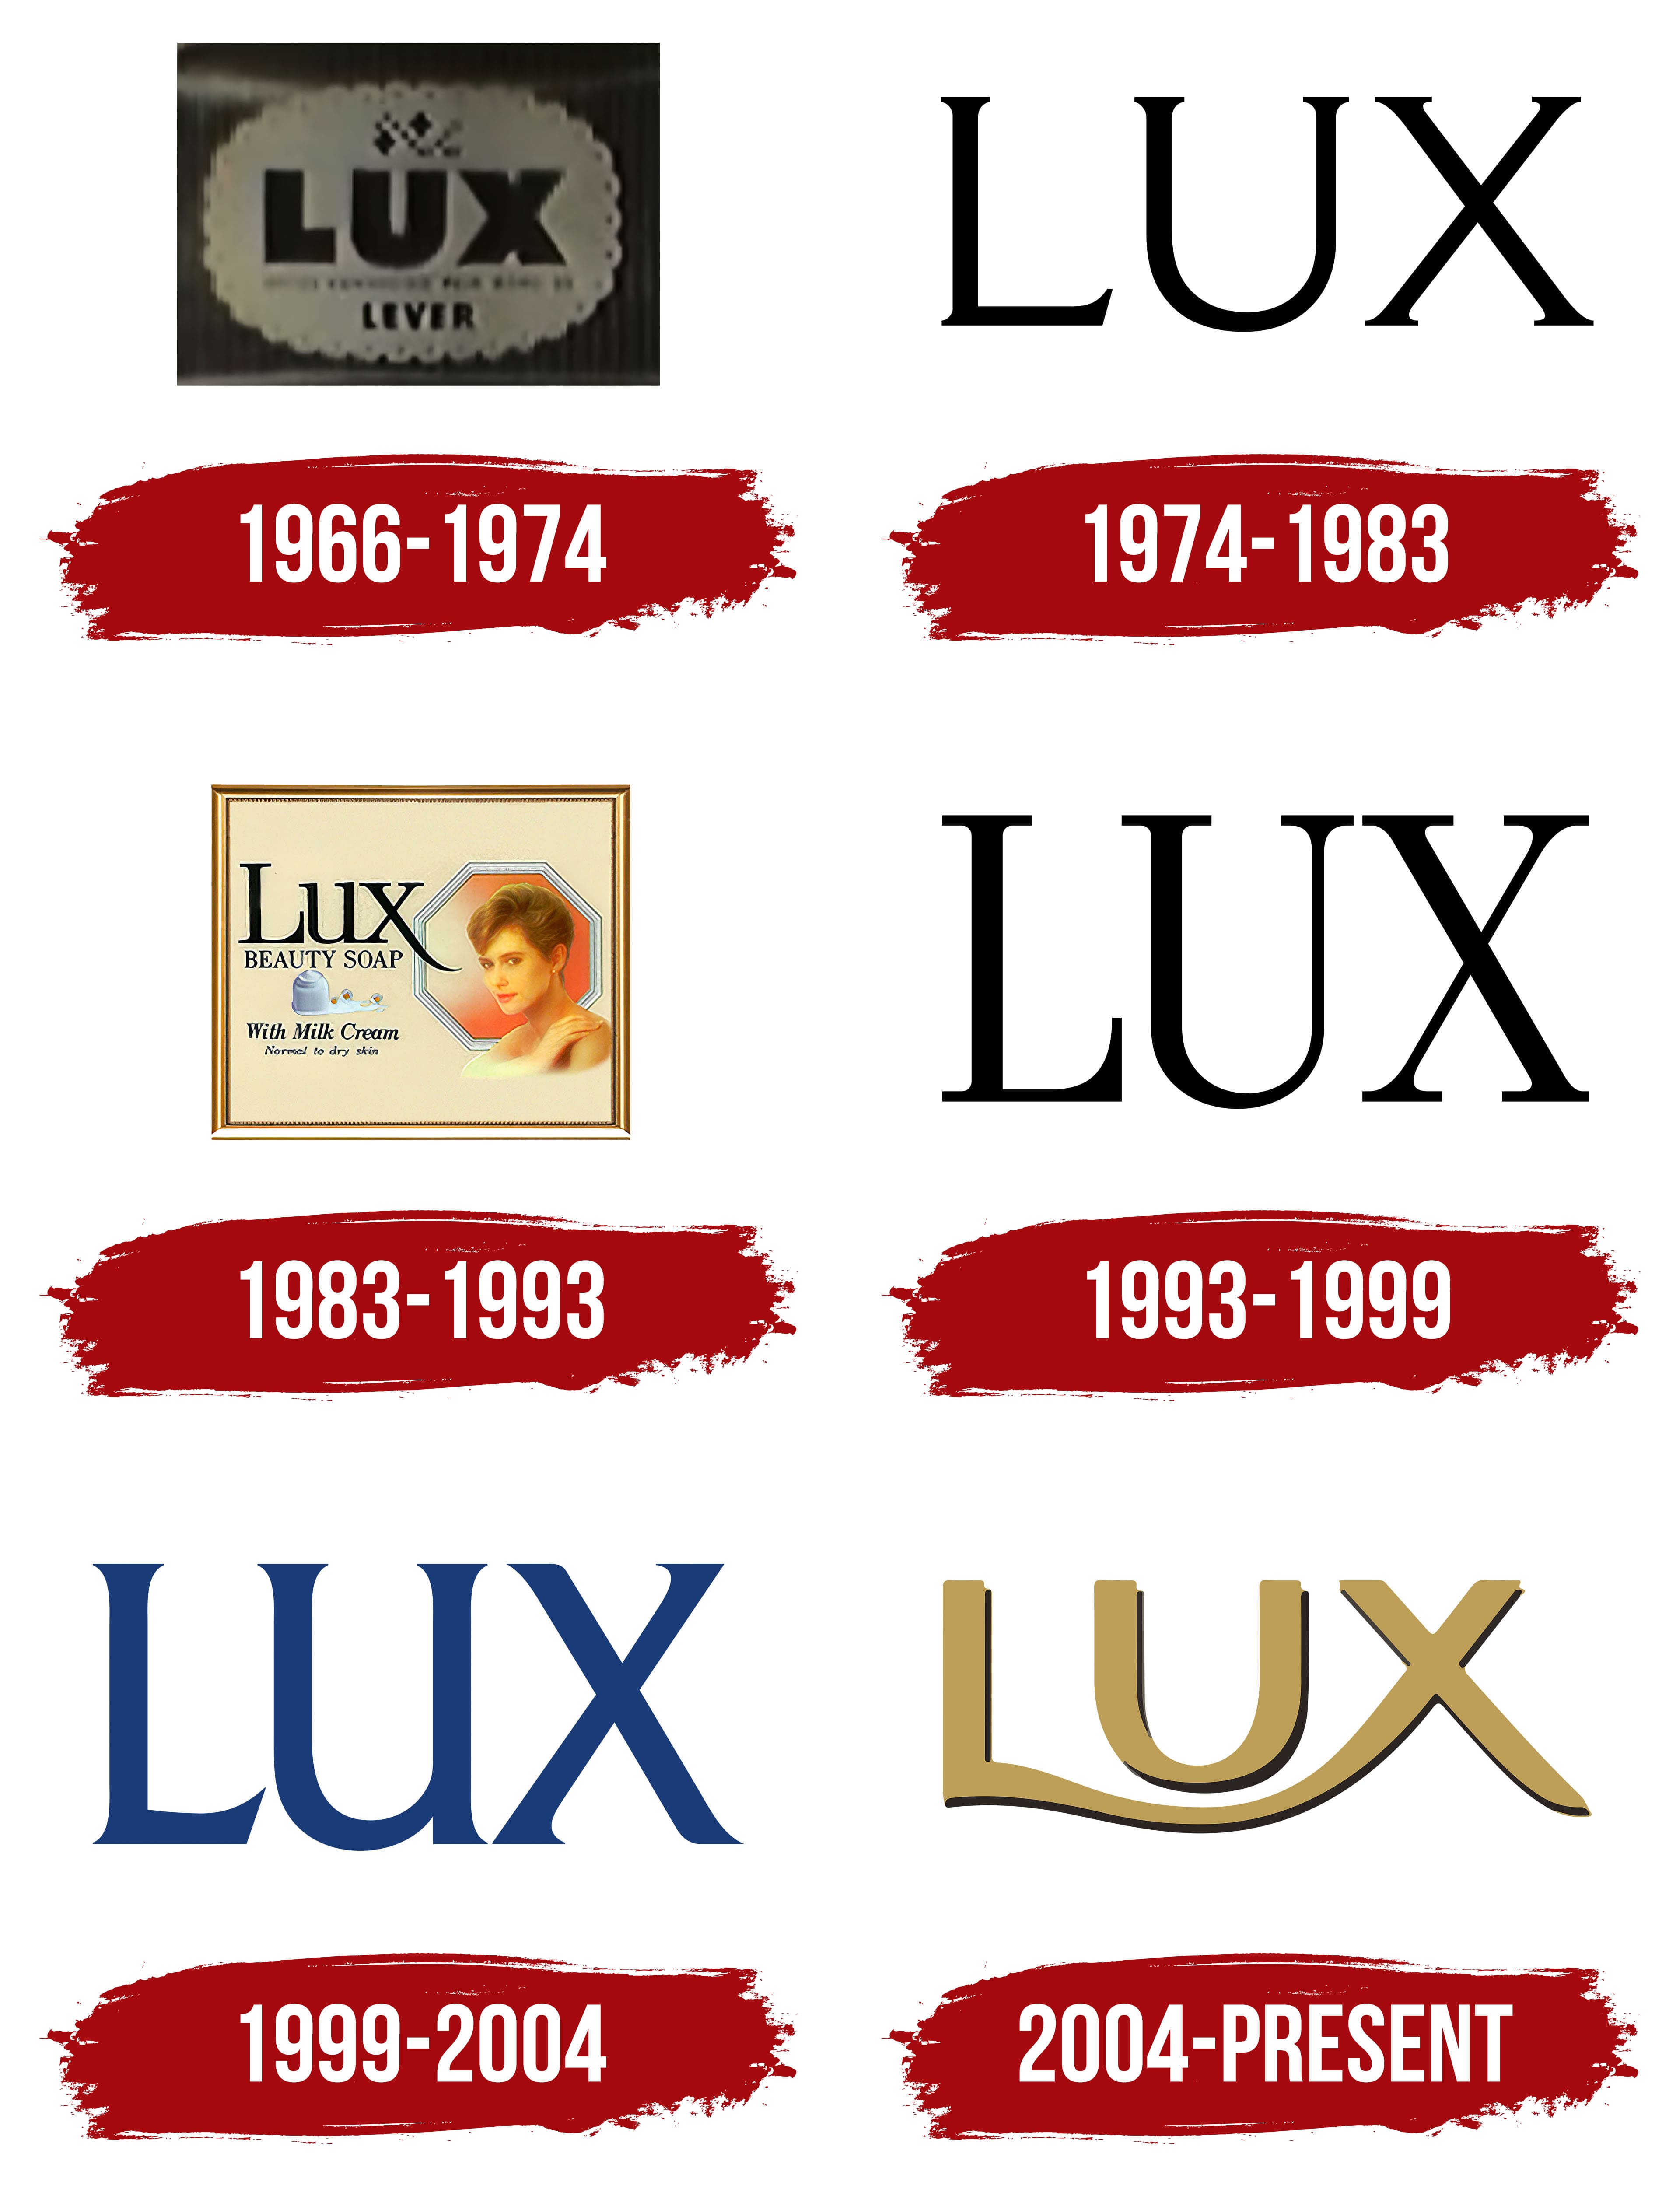 Elaborative Marketing Mix of Lux - With 4Ps | IIDE